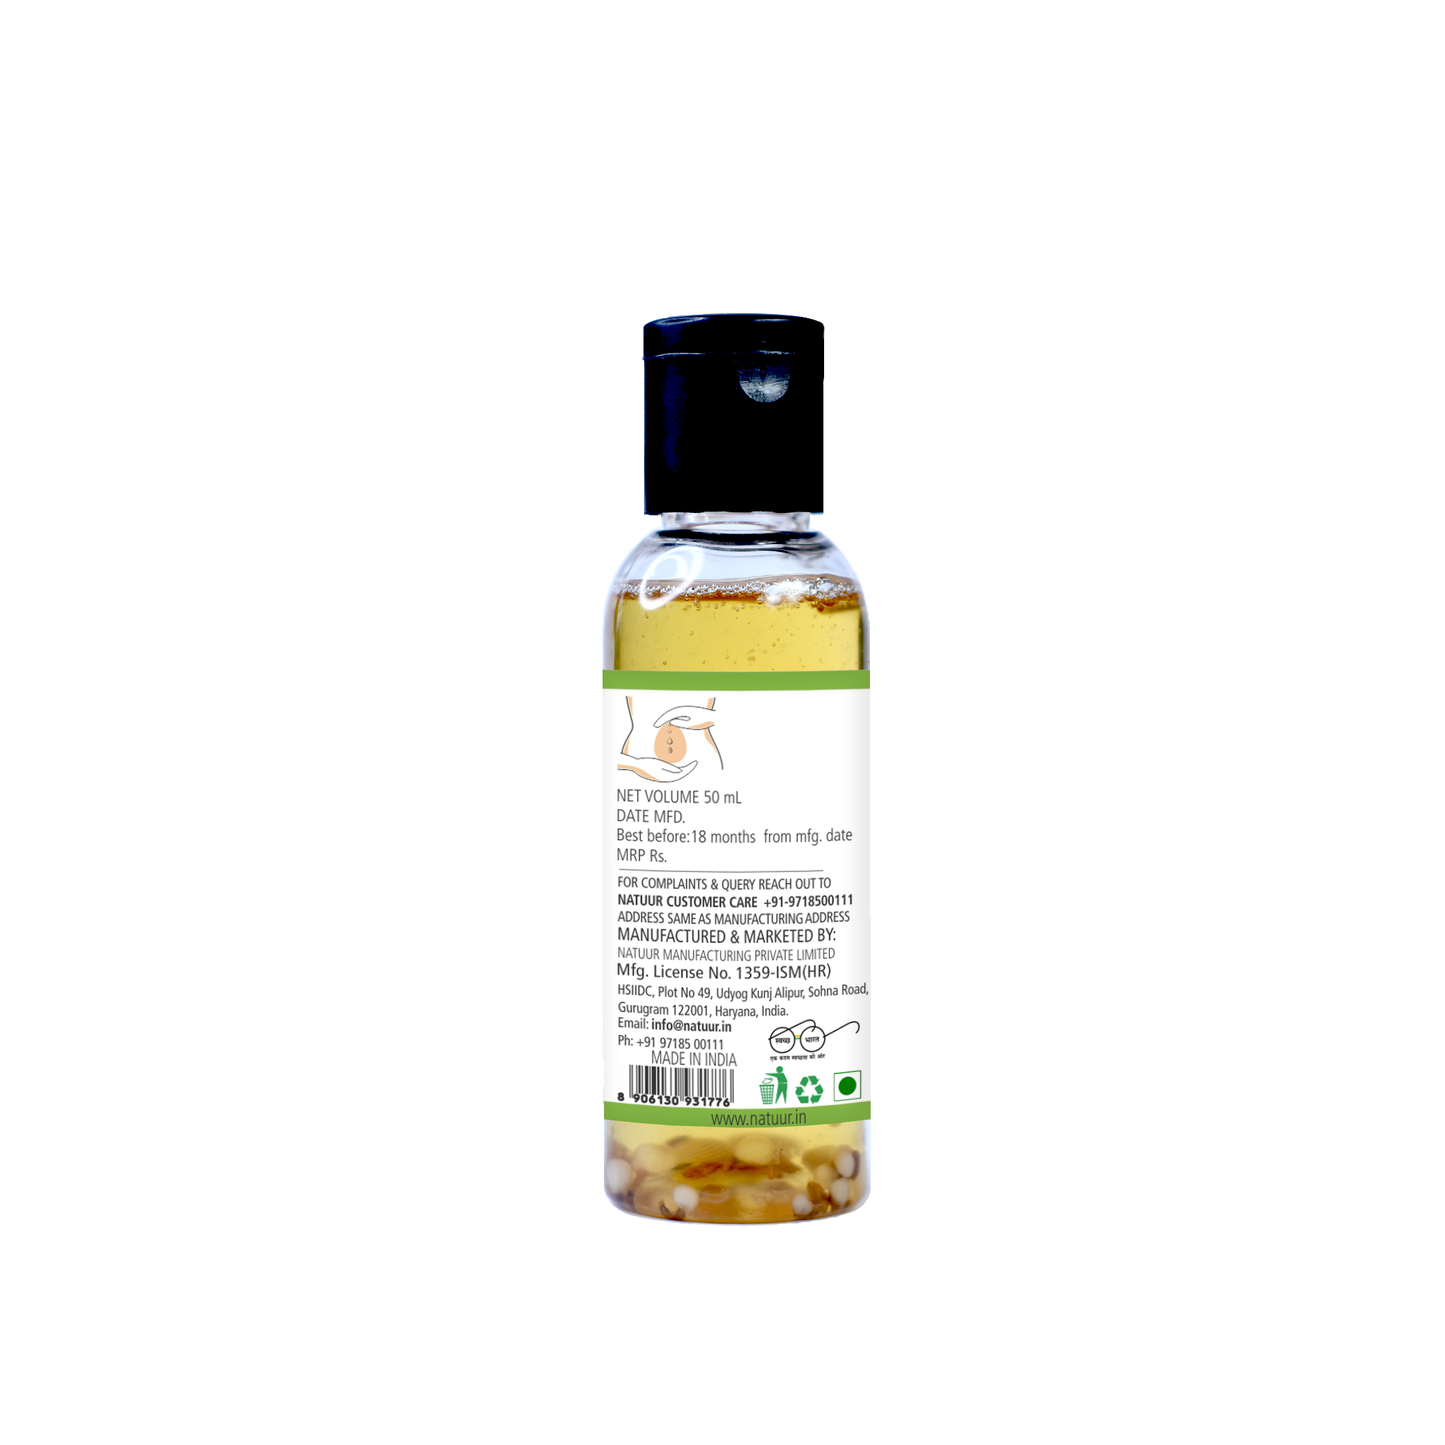 Belly Button Oil for Perfect Vision(50ml) - Natuur.in